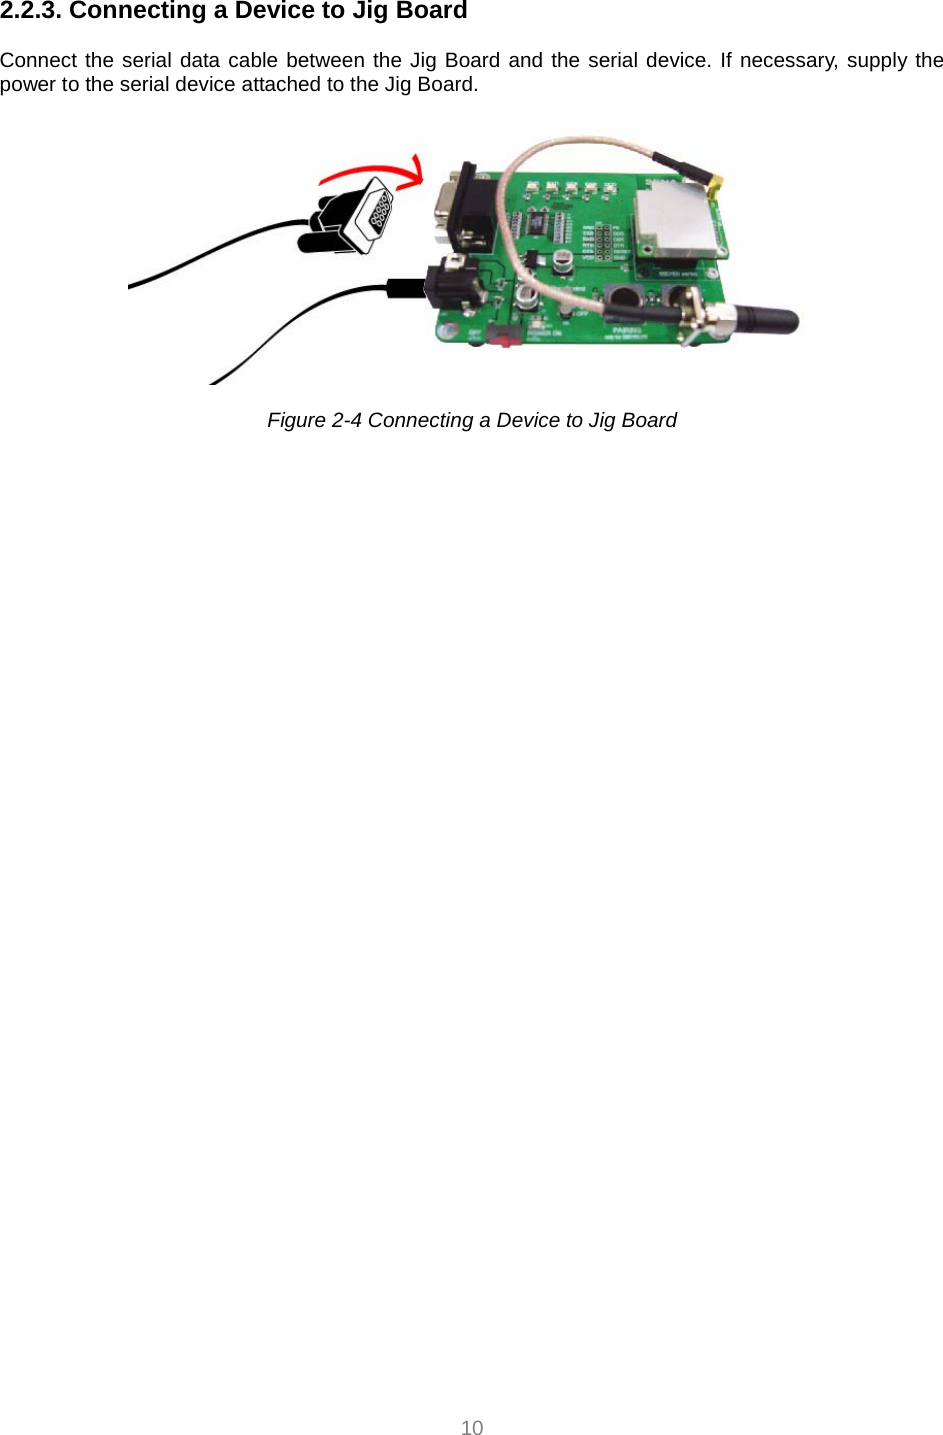  10 2.2.3. Connecting a Device to Jig Board  Connect the serial data cable between the Jig Board and the serial device. If necessary, supply the power to the serial device attached to the Jig Board.    Figure 2-4 Connecting a Device to Jig Board 